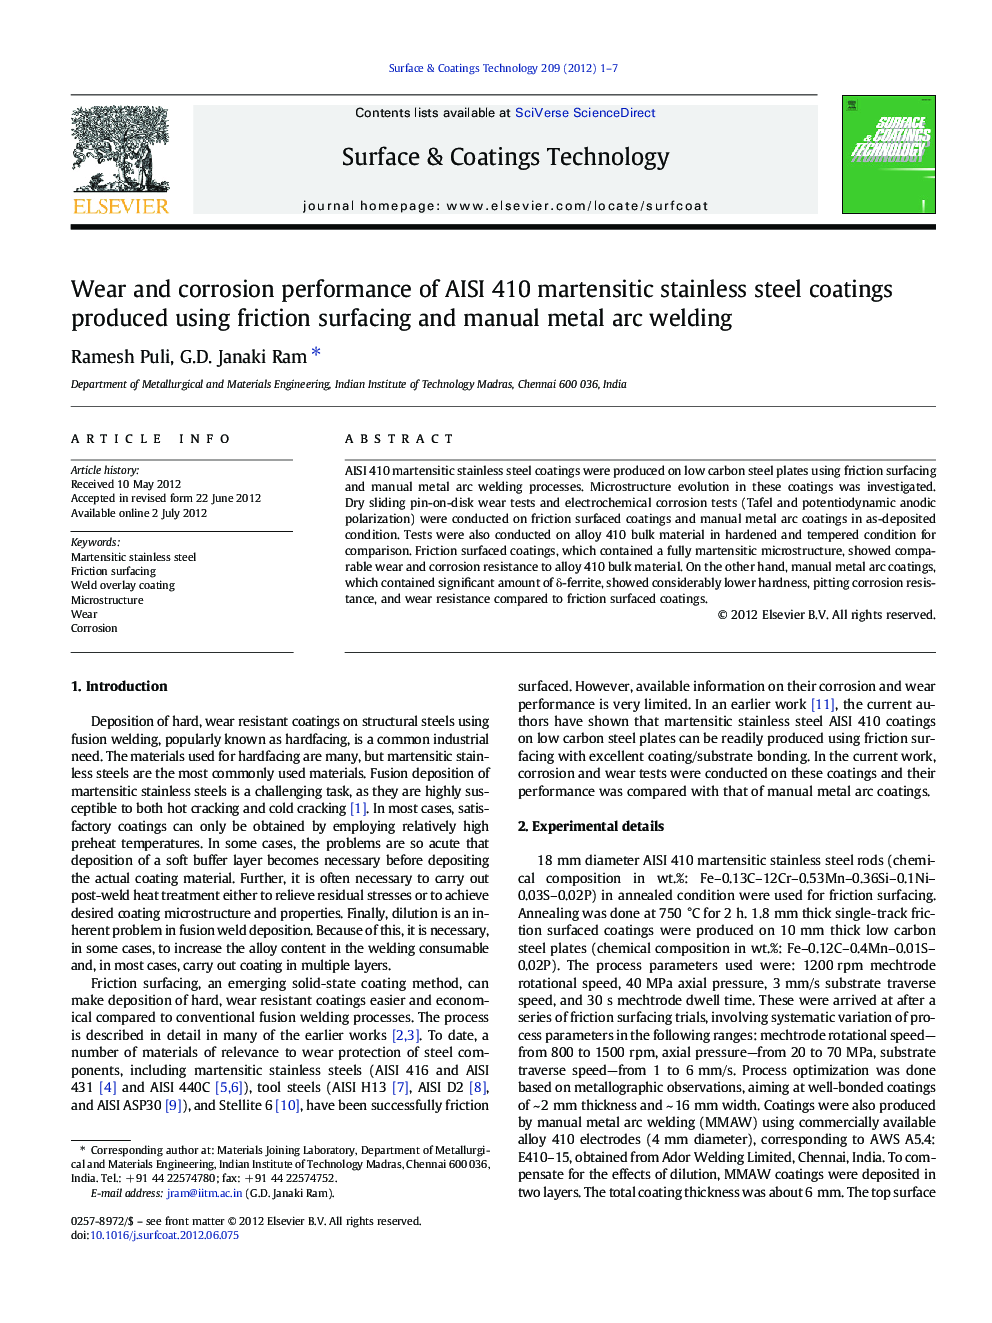 Wear and corrosion performance of AISI 410 martensitic stainless steel coatings produced using friction surfacing and manual metal arc welding